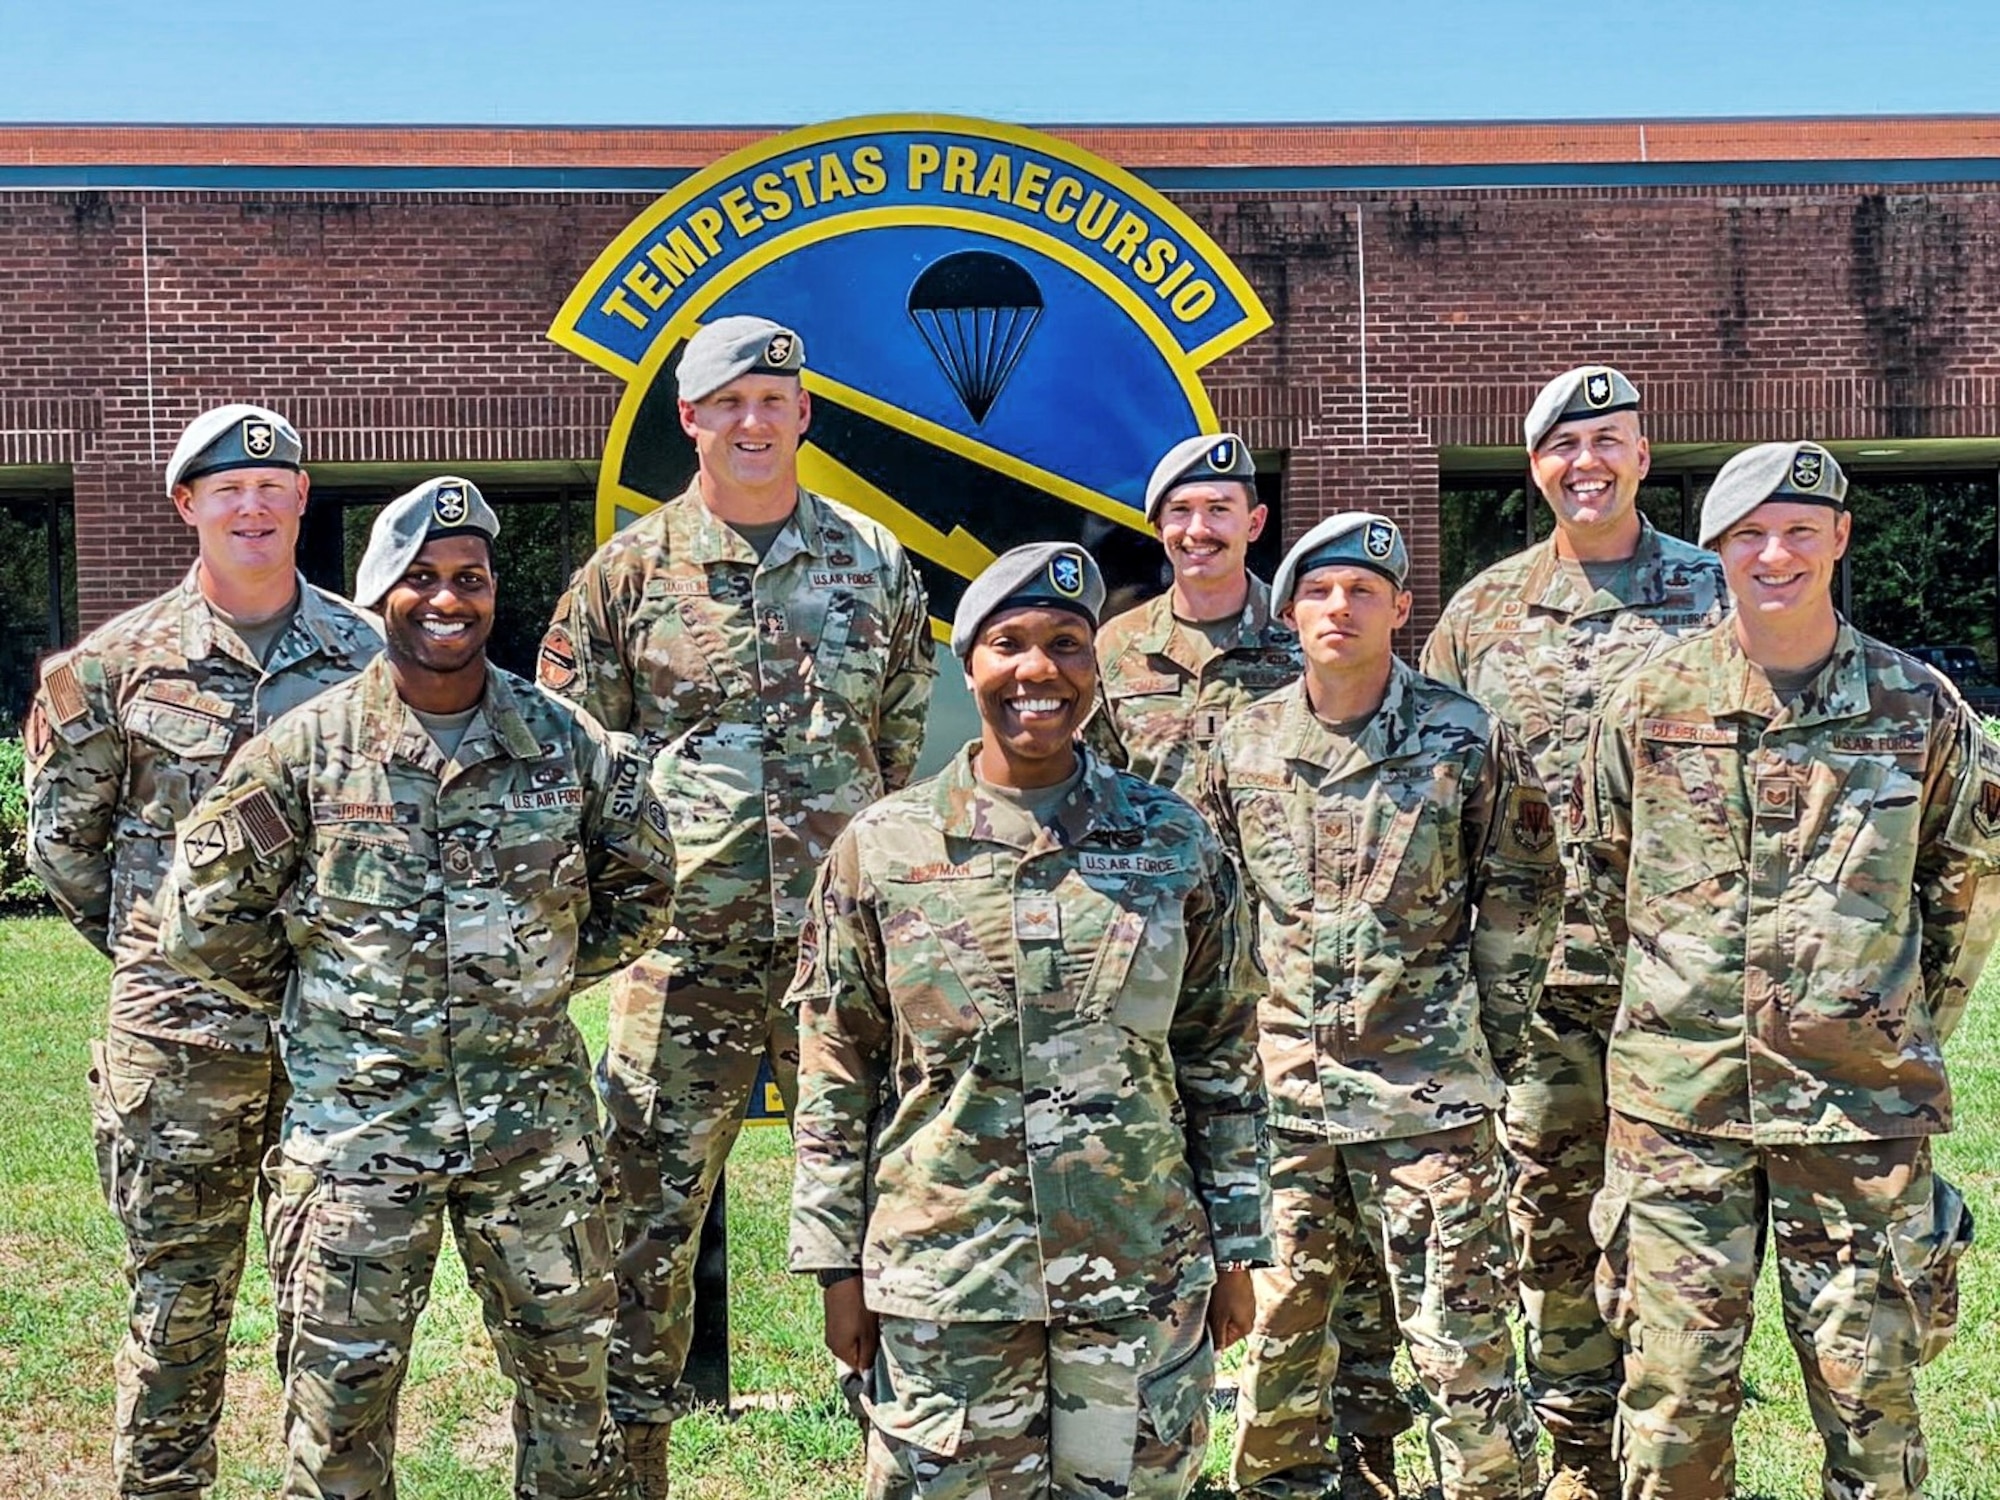 Senior Airman Shanelle Newman, now a Staff Sgt., receives her Grey Beret at the 18th Combat Weather Squadron, Fort Bragg, North Carolina, April 28, 2021. Newman is the first African American female to earn a U.S. Air Force Grey Beret. (Courtesy photo)